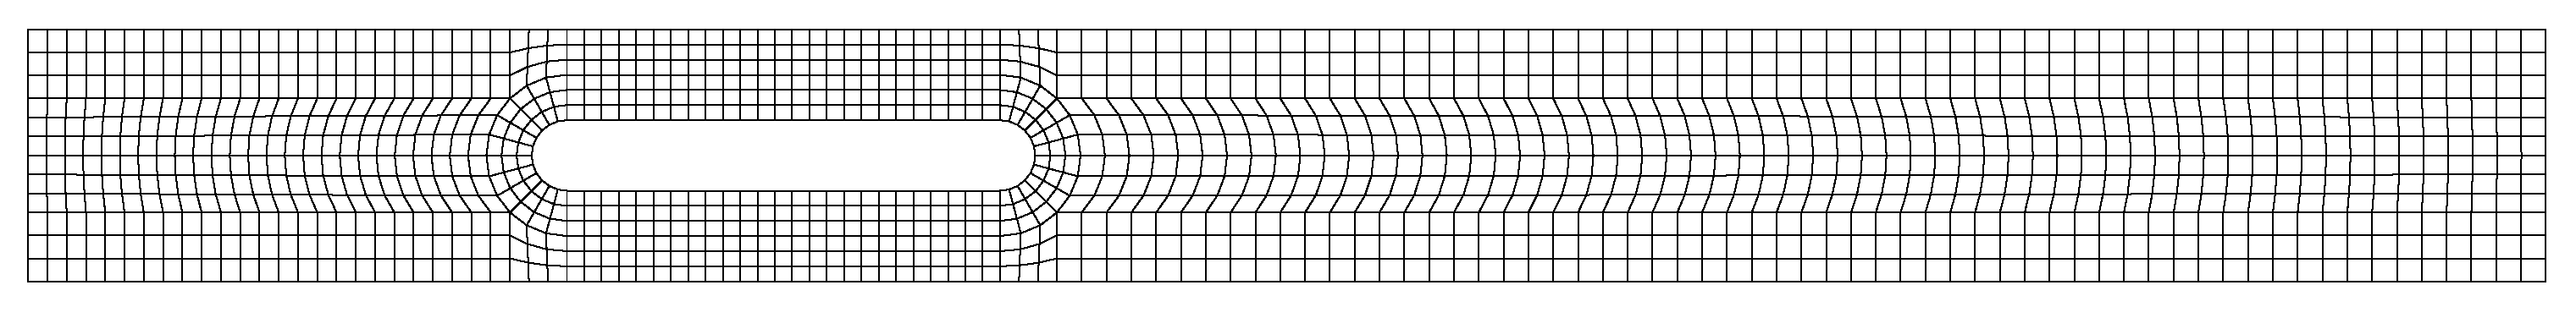 Figure 2. An example of a computational grid created with the utilities blockMesh and mirrorMesh for a mesh spacing of 2 mm.